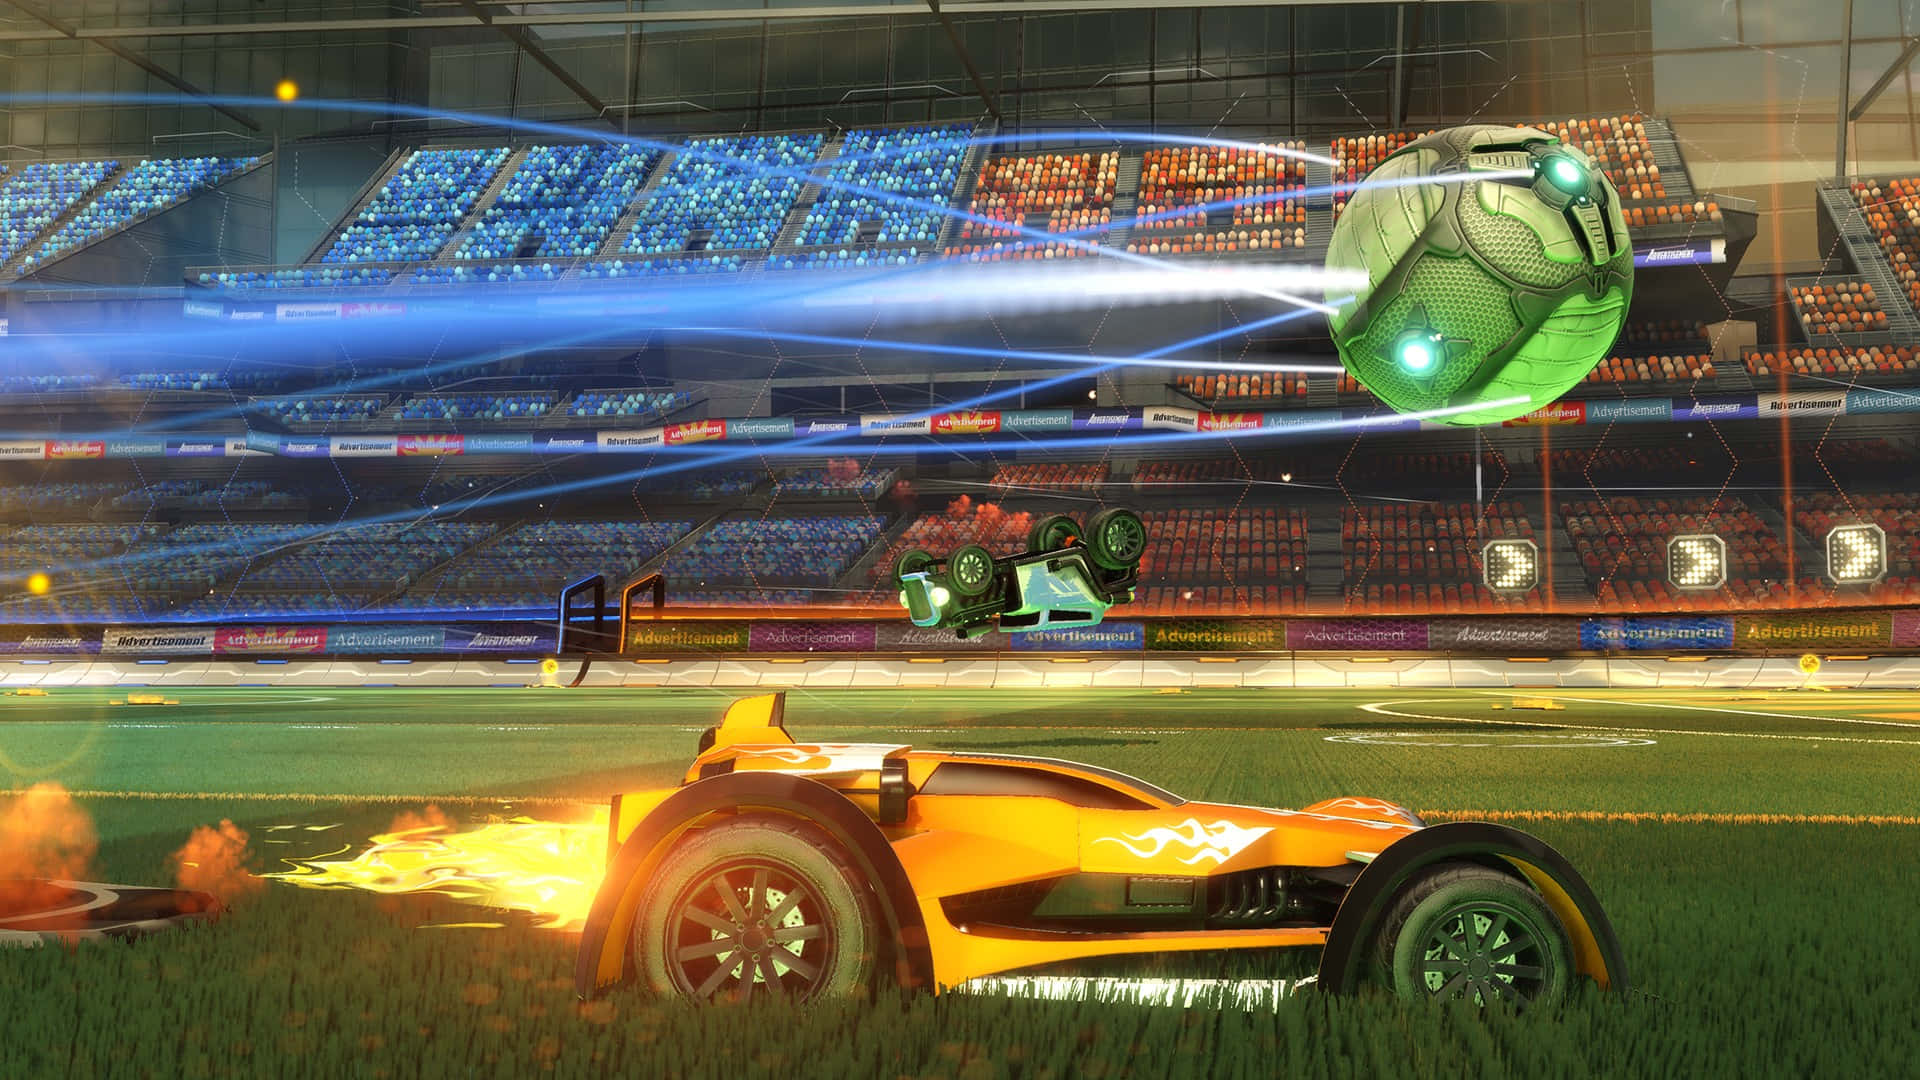 Image  Rocket League players launch their vehicles in an intense matchup